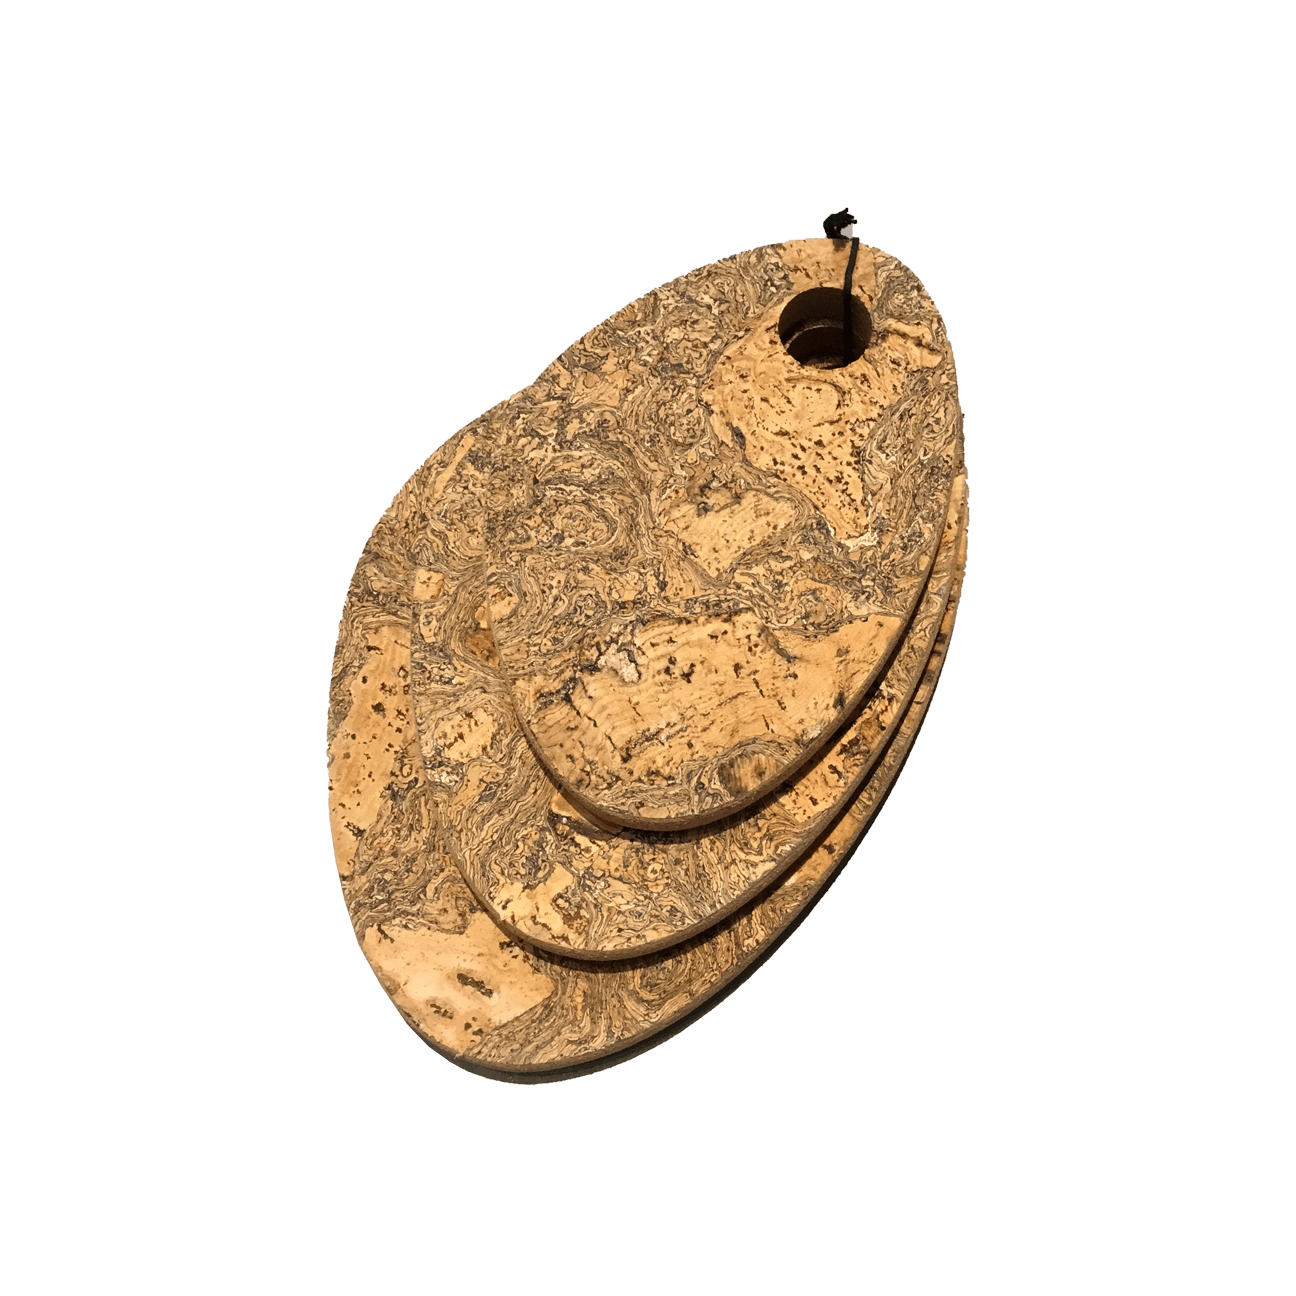 Three raindrop shaped hot pads with the swirling corkstone pattern